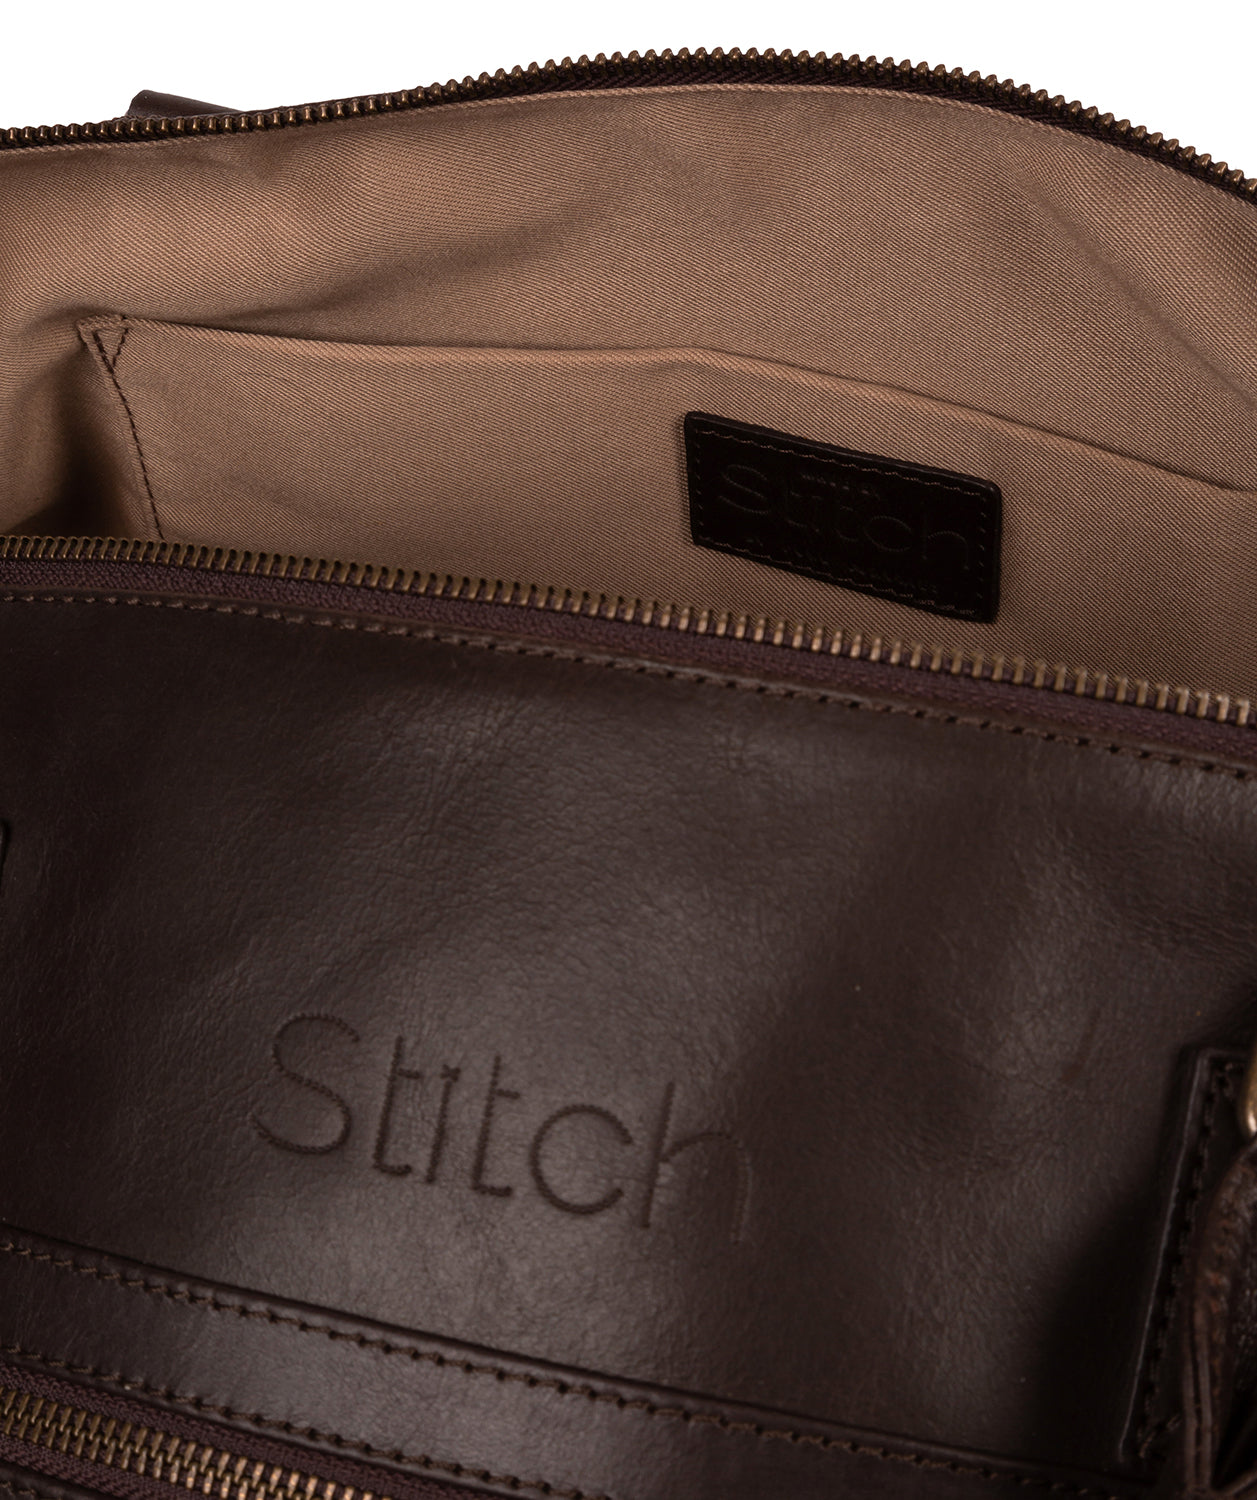 'Shuttle' Cocoa Leather Holdall